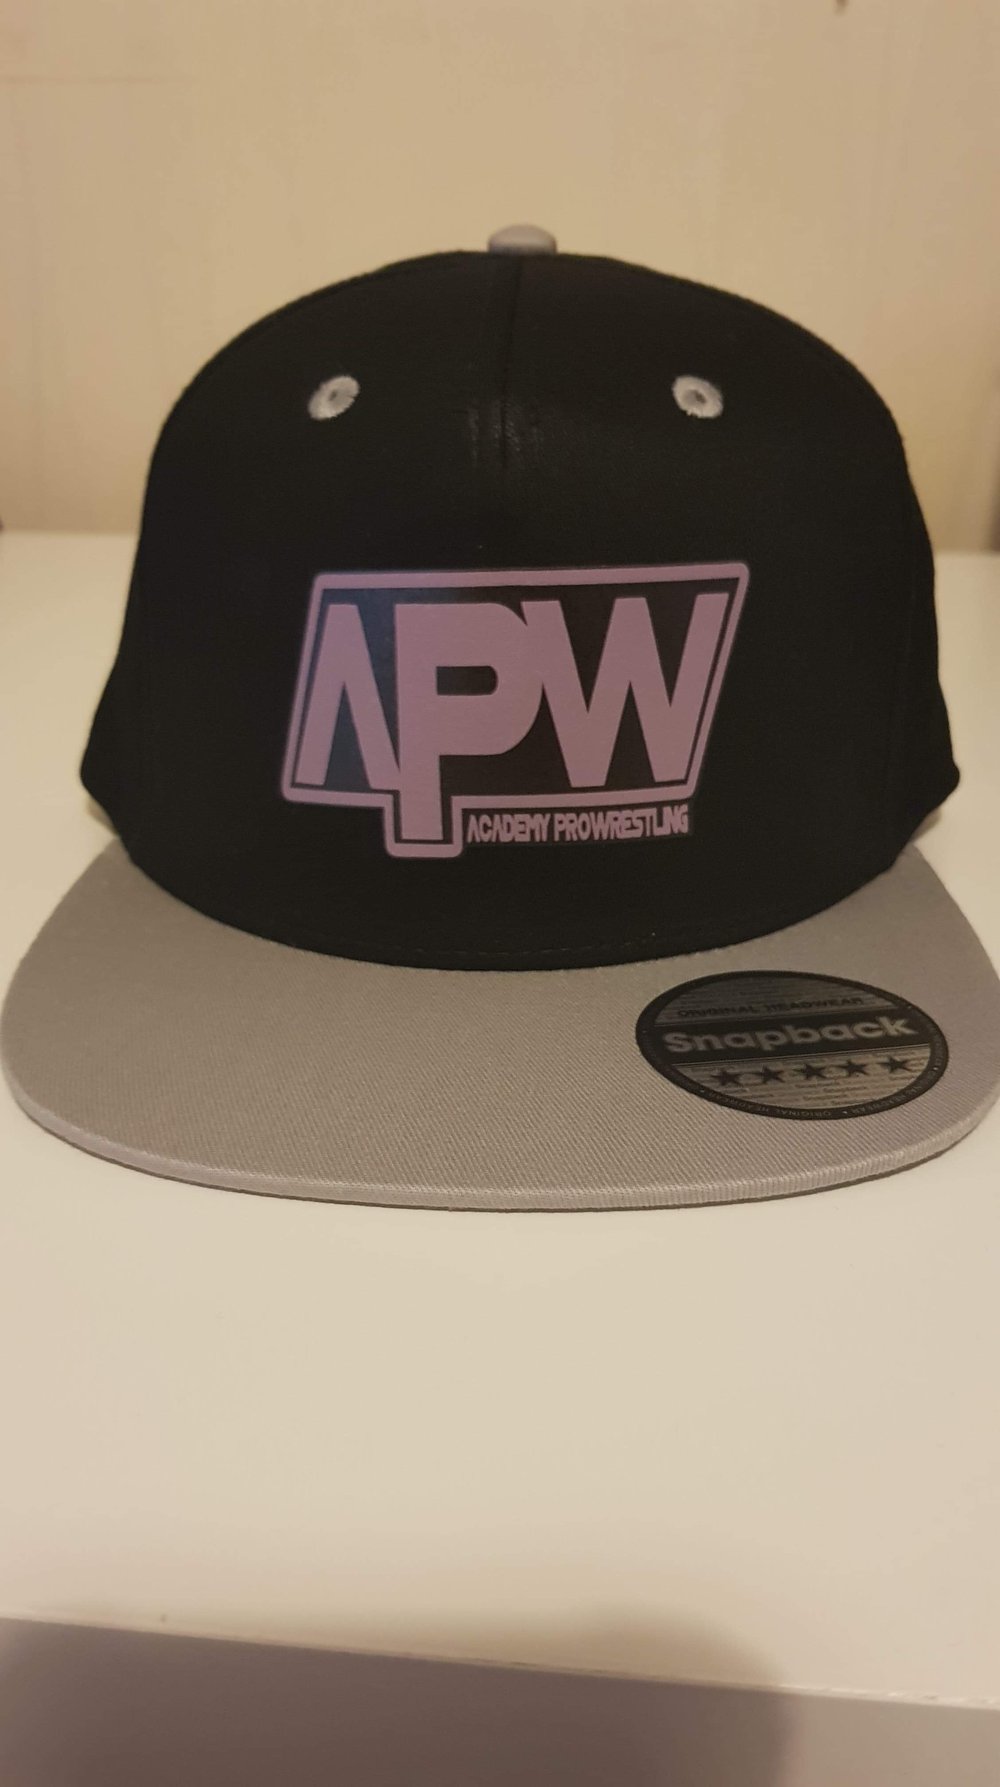 Image of APW Snap back caps